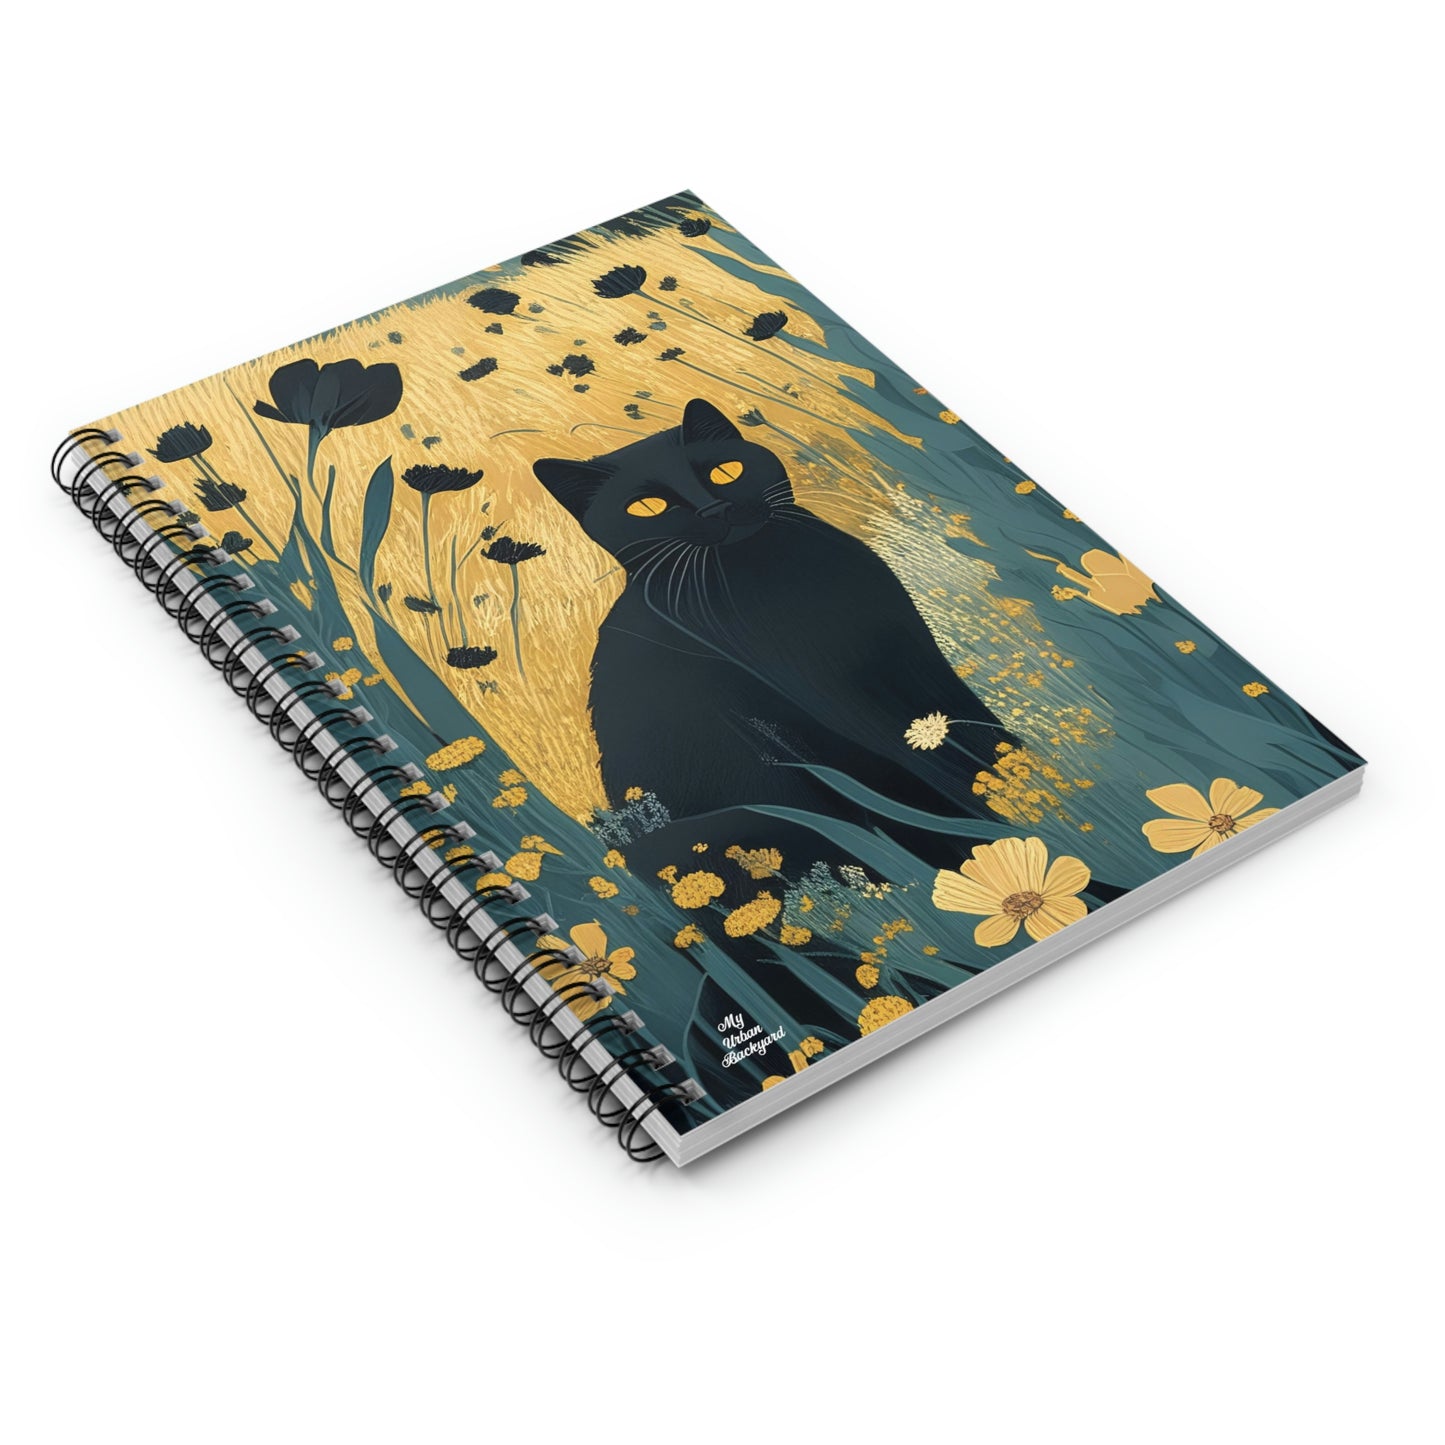 Black Cat with Black Flowers, Spiral Notebook Journal - Write in Style